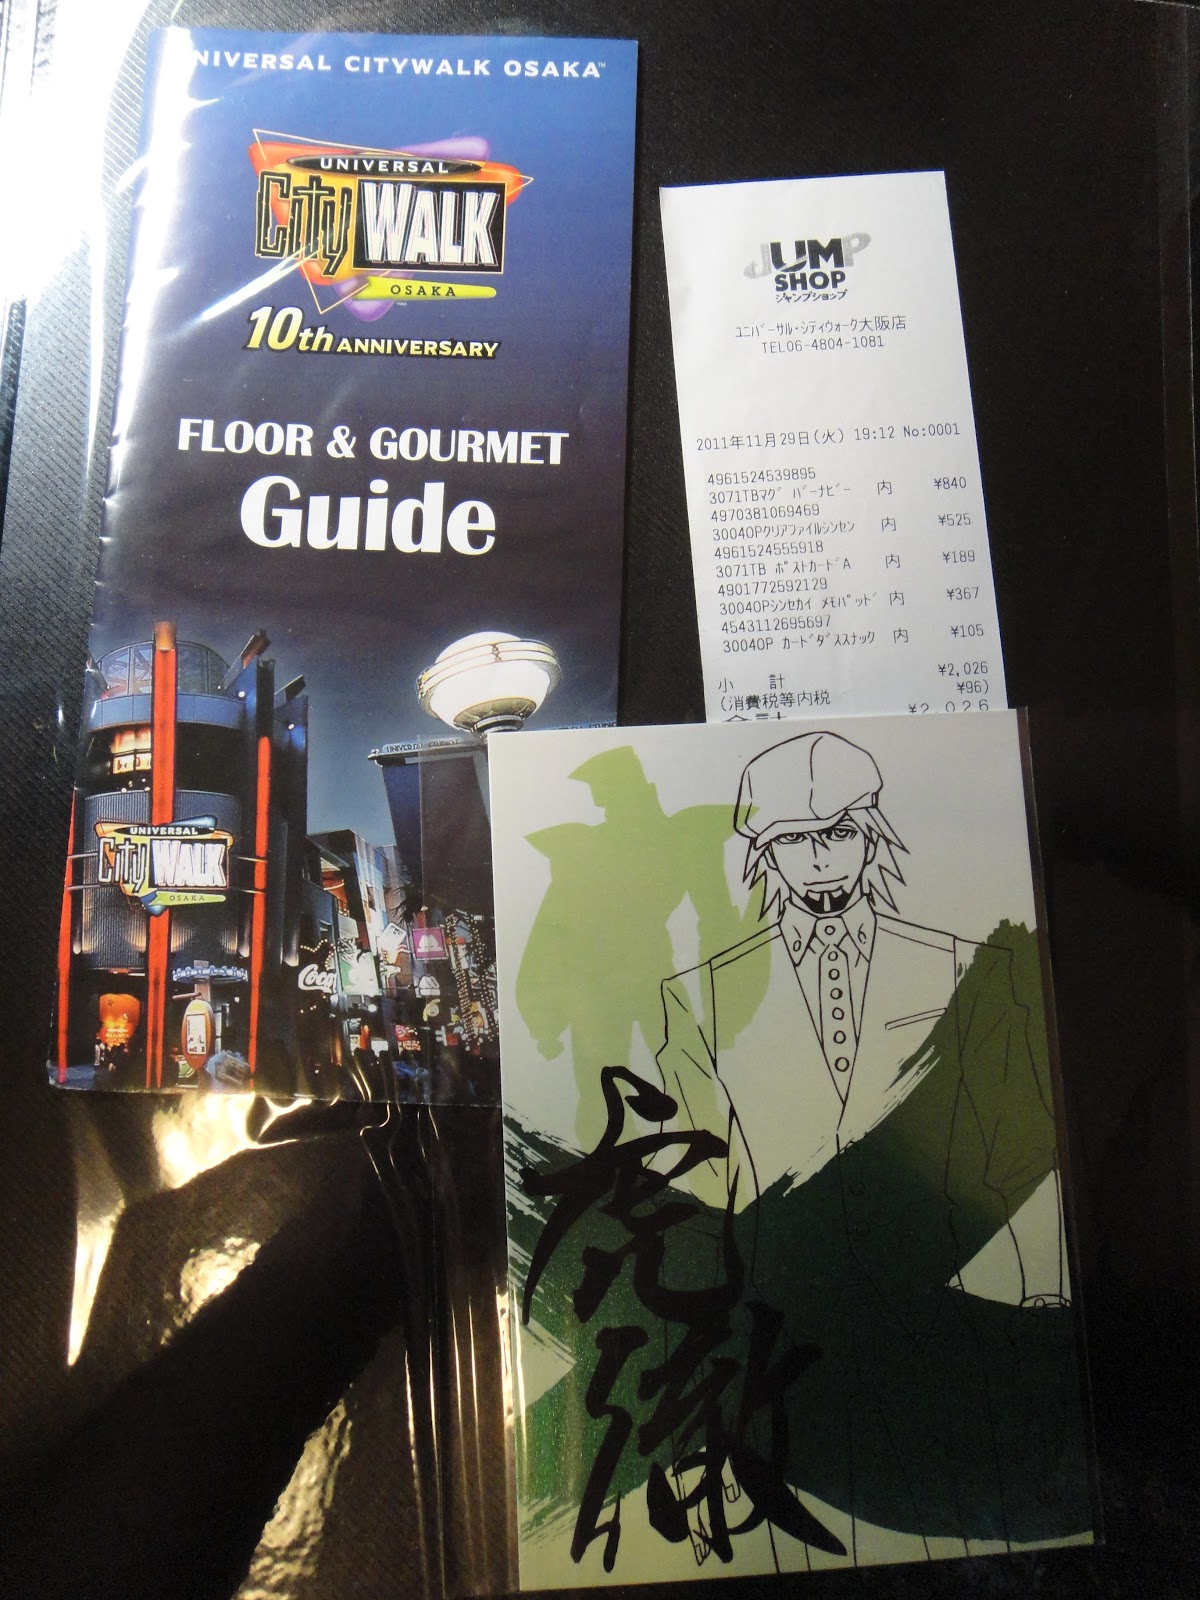 bag guide map show time guide admission ticket and receipt